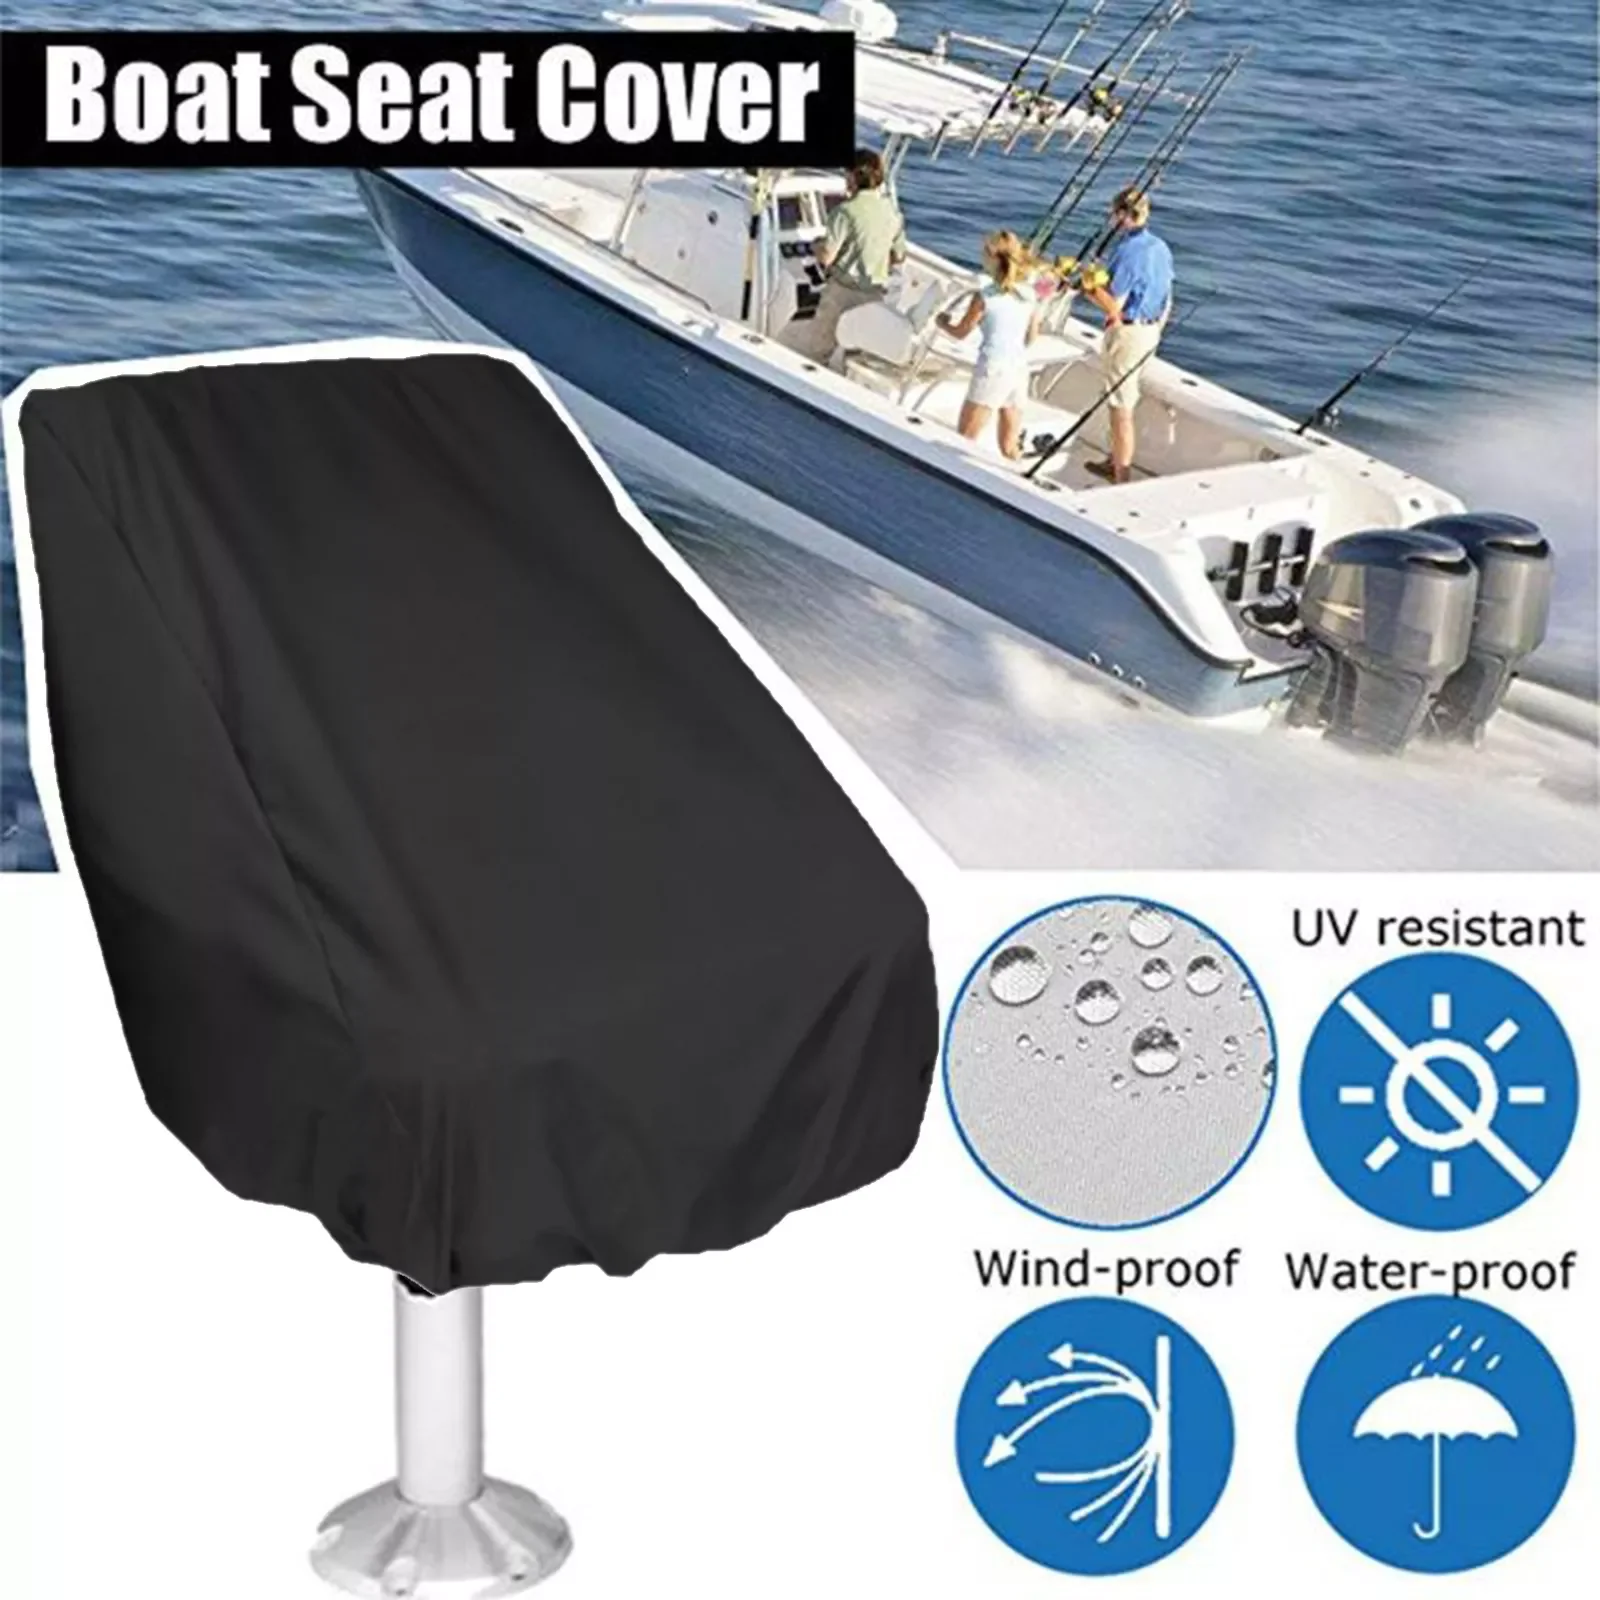 

Boat Seat Cover Anti UV Dust Yatch Boat Seat Cover Oxford Cloth Marine Outdoor Elastic Folding Chair Table Cover